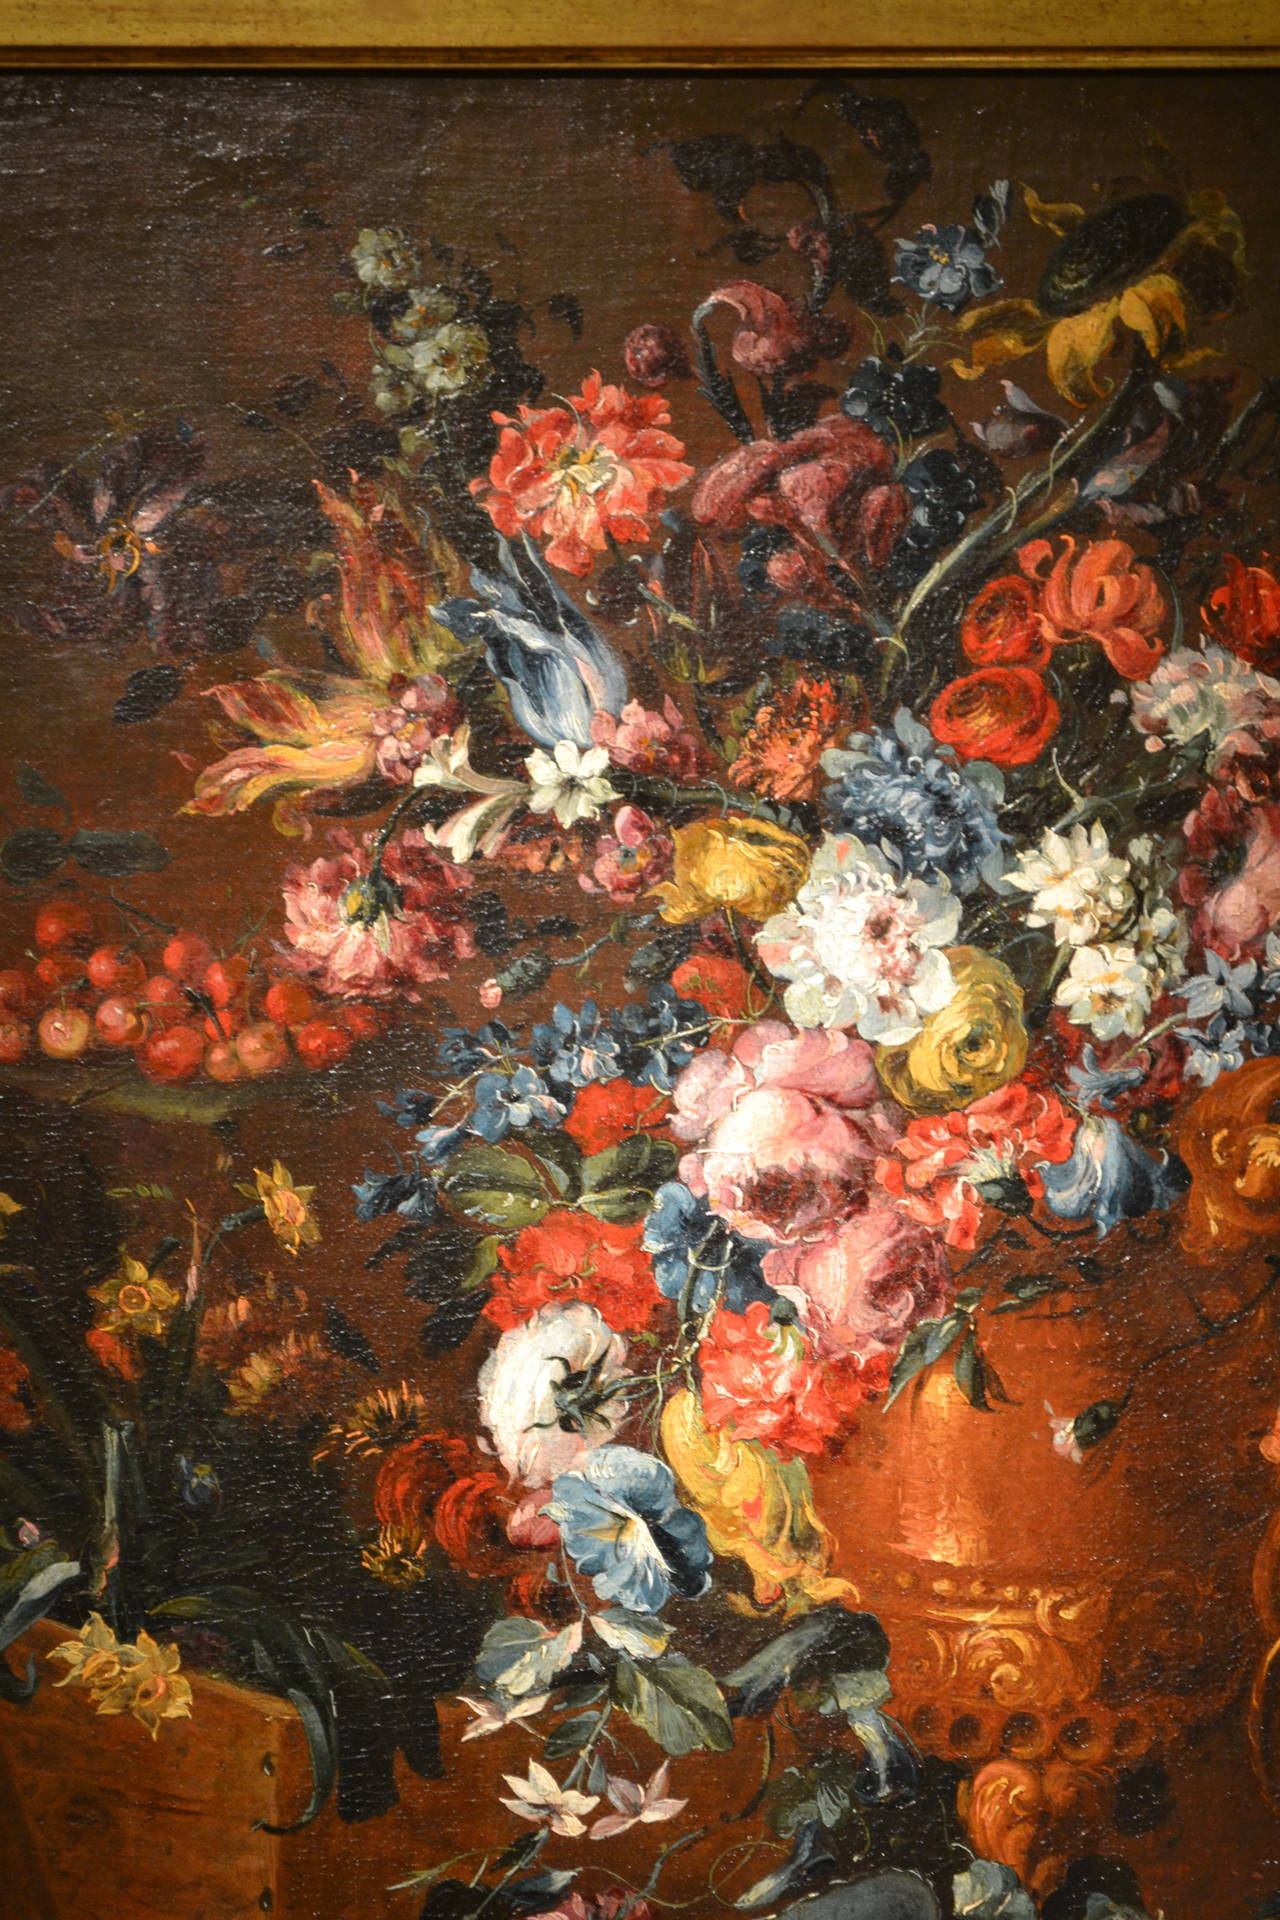 Bartolomeo Bimbi (1648–1723) was a Florentine painter of still lifes, spurred by his patrons including Cosimo III, Grand Duke of Tuscany to paint large canvases of flora and fauna for the Medici Villa dell'Ambrogiana and della Topaia, now conserved